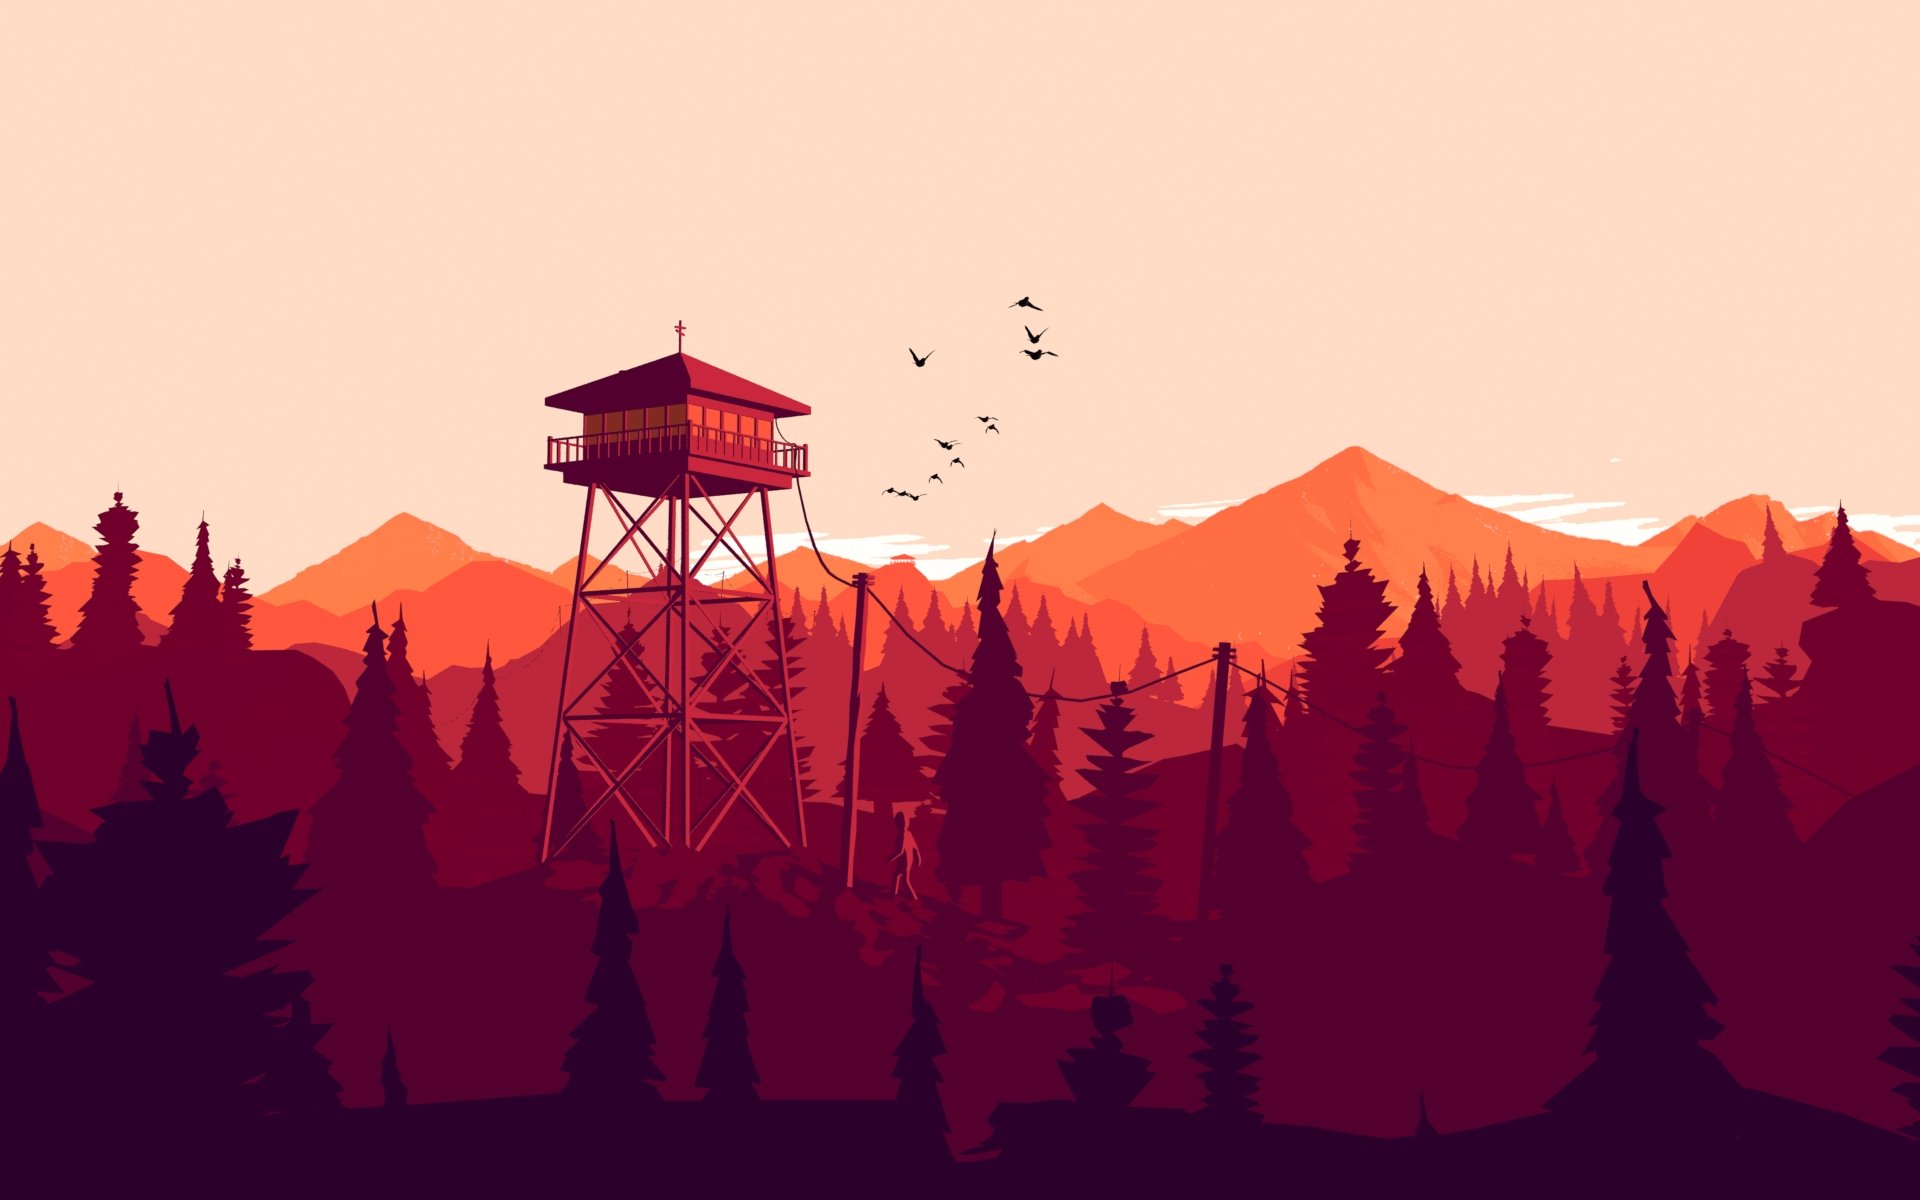 Firewatch doesn't have overly complicated controls